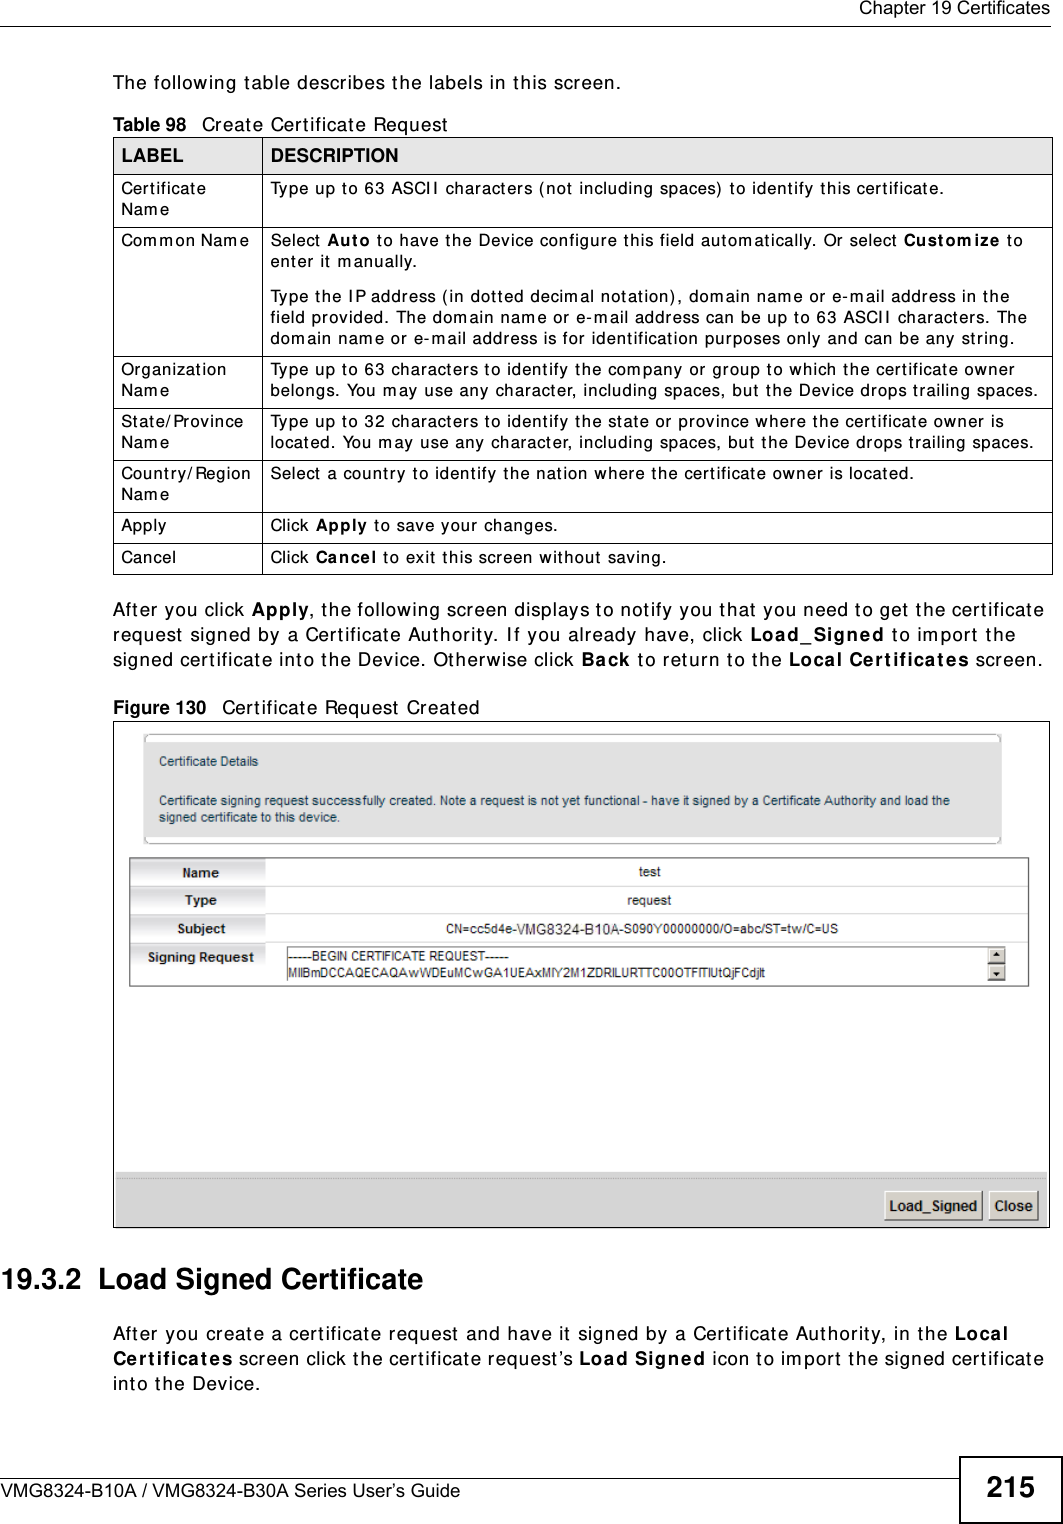  Chapter 19 CertificatesVMG8324-B10A / VMG8324-B30A Series User’s Guide 215The following t able describes the labels in t his screen. After you click Apply, t he following screen displays t o notify you that you need t o get the certificate request  signed by a Certificate Aut hority. I f you already have, click Loa d_ Signed to im port the signed certificate into the Device. Ot herwise click Ba ck  t o ret urn t o t he Local Ce rt ificat es screen. Figure 130   Cert ificate Request Creat ed19.3.2  Load Signed Certificate After you creat e a cert ificate request  and have it signed by a Cert ificate Authority, in t he Loca l Ce r t ifica t e s screen click the certificat e request’s Load Sign ed icon t o im port the signed cer t ificat e into the Device. Table 98   Creat e Certificat e RequestLABEL DESCRIPTIONCertificat e Nam eType up t o 63 ASCI I  characters ( not  including spaces)  to ident ify t his cer t ificat e. Com m on Nam e  Select Aut o t o have the Device configure this field aut om at ically. Or select  Cust om i ze  t o ent er it  m anually. Type t he I P address ( in dott ed decim al notation), dom ain nam e or e- m ail address in t he field provided. The dom ain nam e or  e- m ail address can be up t o 63 ASCI I  charact ers. The dom ain nam e or e-m ail address is for ident ification purposes only and can be any string.Organizat ion Nam eType up t o 63 charact ers to identify t he com pany or group to w hich t he certificate owner belongs.  You m ay use any charact er, including spaces, but the Device drops t railing spaces.St ate/ Province Nam eType up t o 32 charact ers to identify t he state or  province where the certificat e ow ner  is locat ed. You m ay use any character, including spaces, but t he Device drops trailing spaces.Count ry/ Region Nam eSelect a count ry t o identify the nat ion where the certificate ow ner is locat ed. Apply Click Apply to save your changes.Cancel Click  Cance l t o exit  this screen without saving.